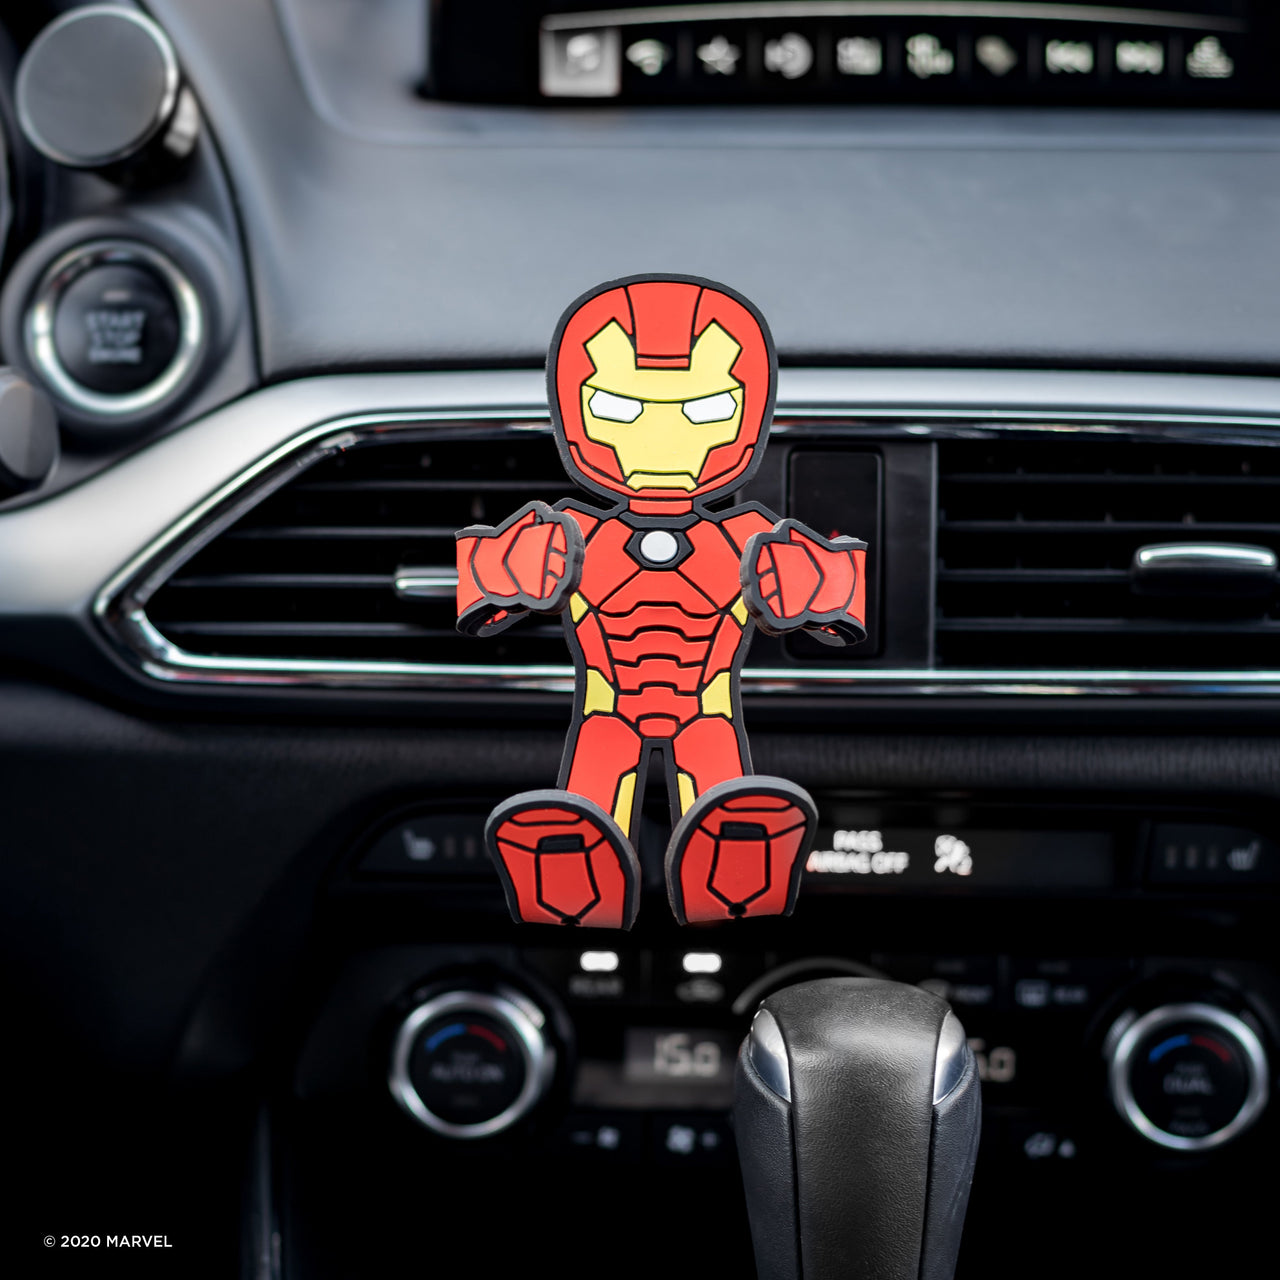 Image of Marvel Comics Iron Man Hug Buddy attached to a vehicle air vent with arms and legs in the folded closed position ready to grasp a cell-phone or smart device